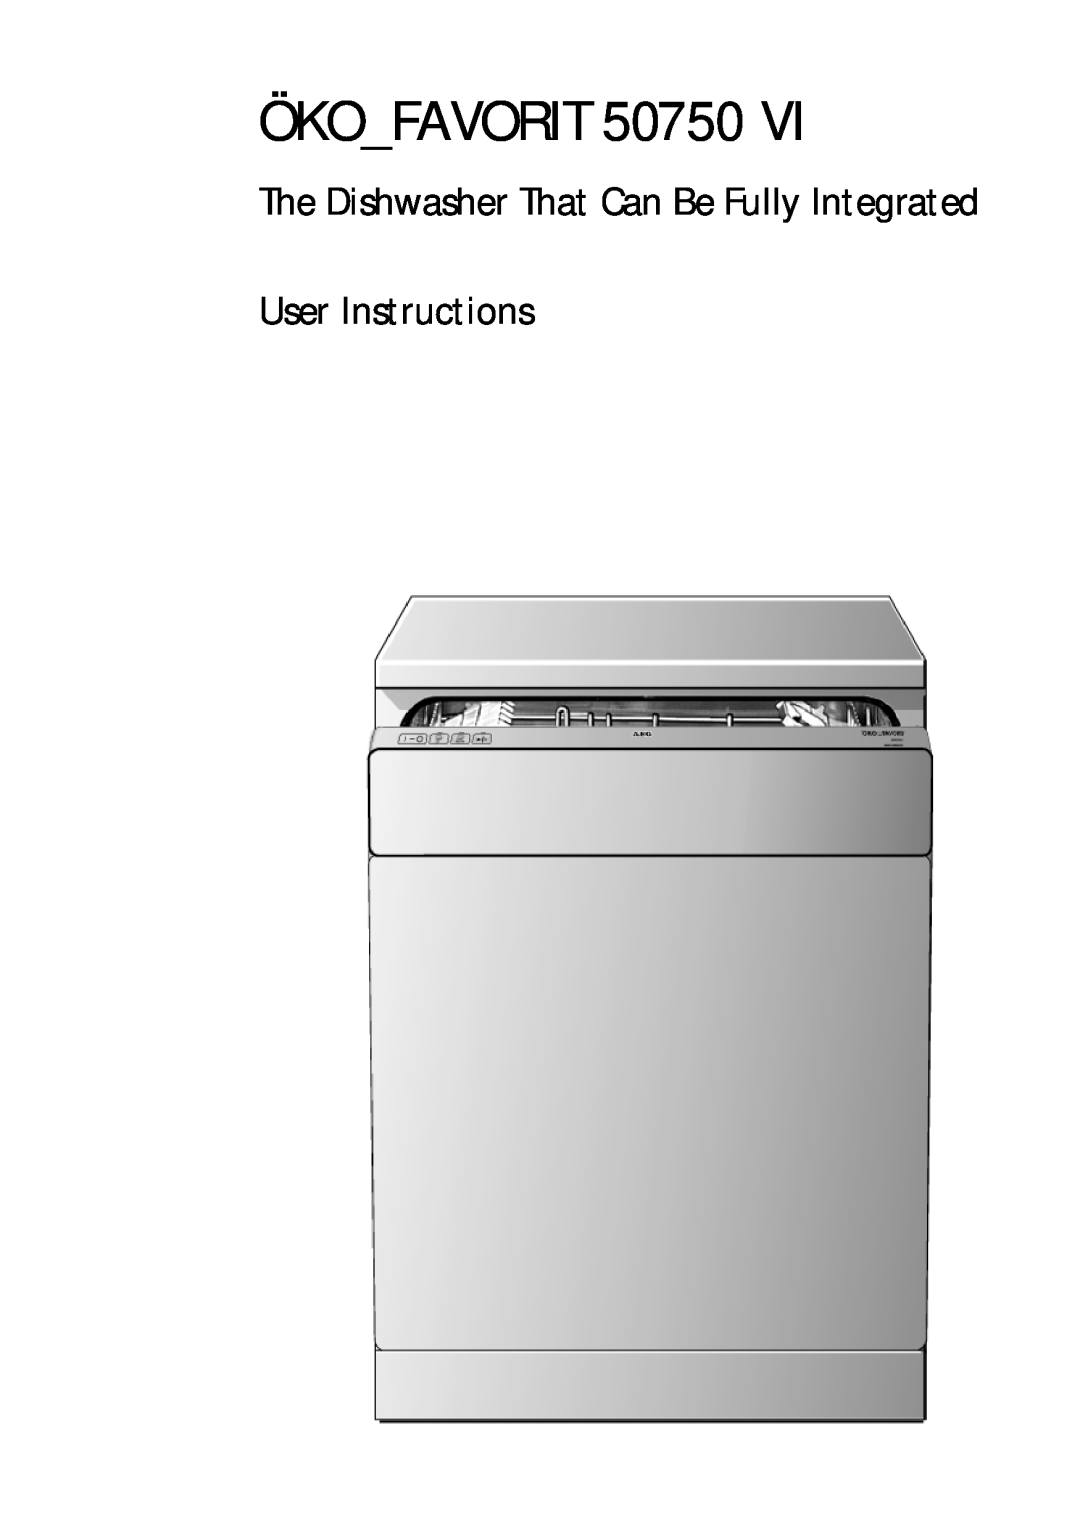 Electrolux 50750 VI manual ÖKOFAVORIT 50750, The Dishwasher That Can Be Fully Integrated User Instructions 